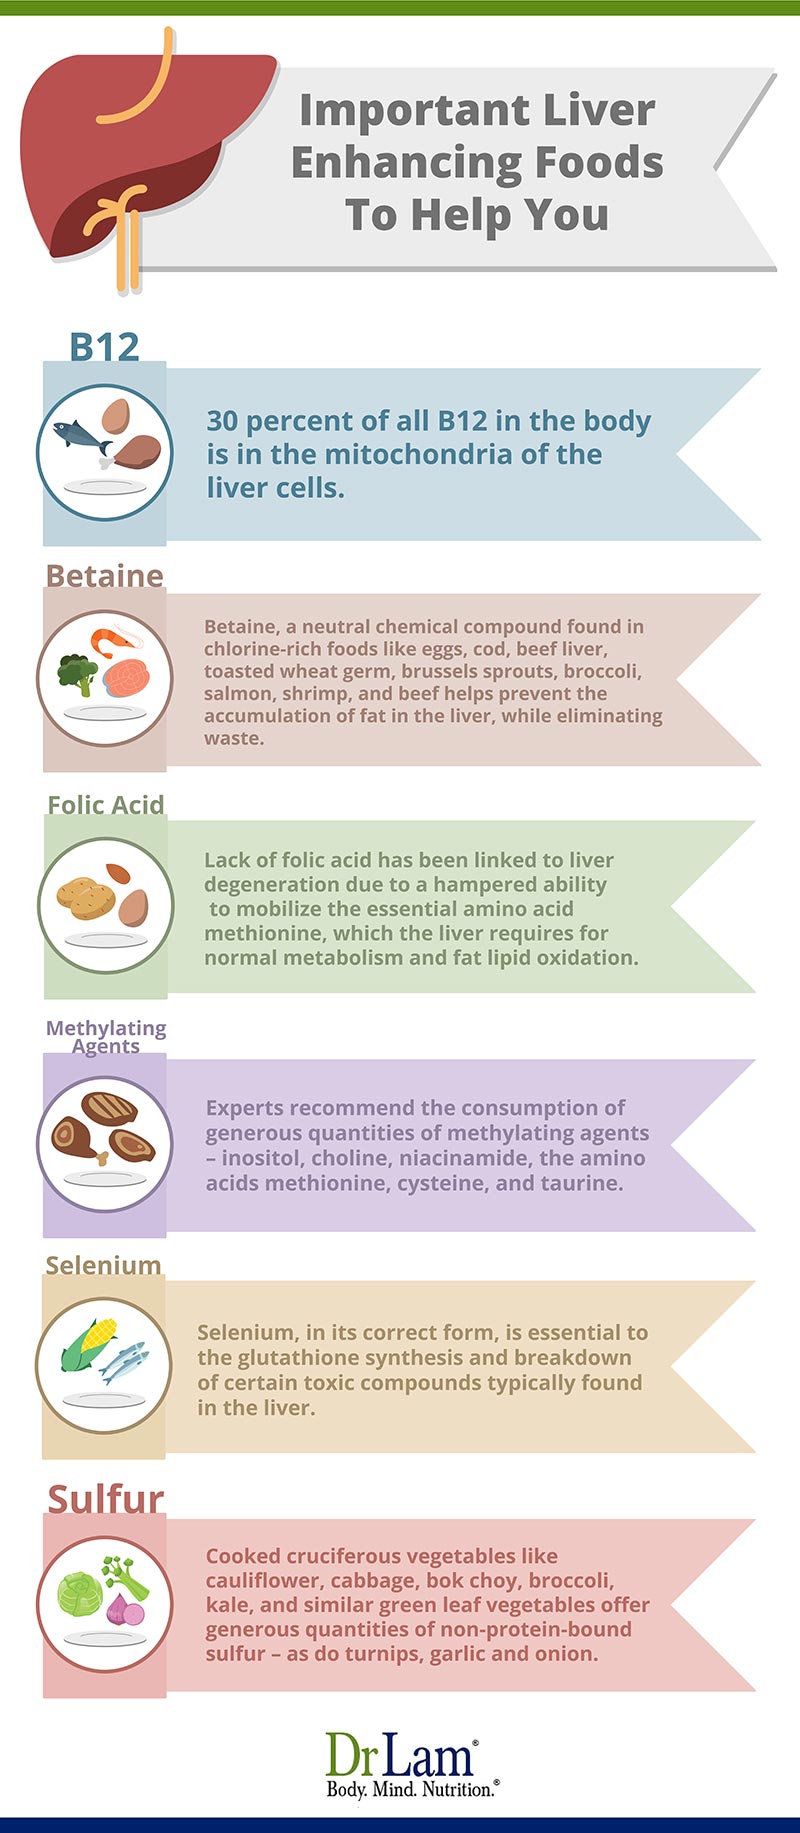 Check out this easy to understand infographic about the important liver enhancing foods to help you